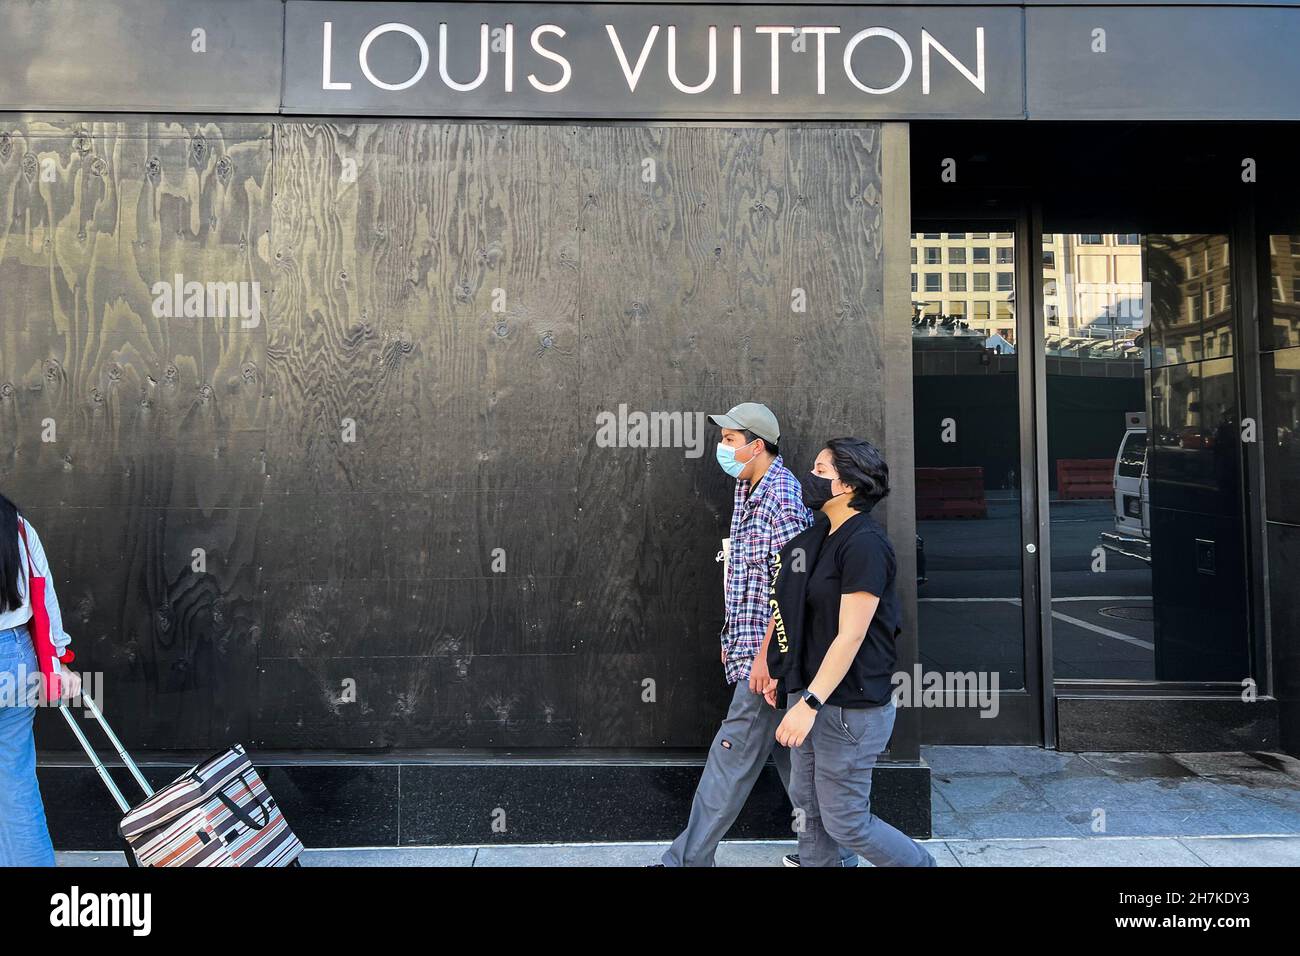 louis vuitton store boarded up during covid 19 Stock Photo - Alamy